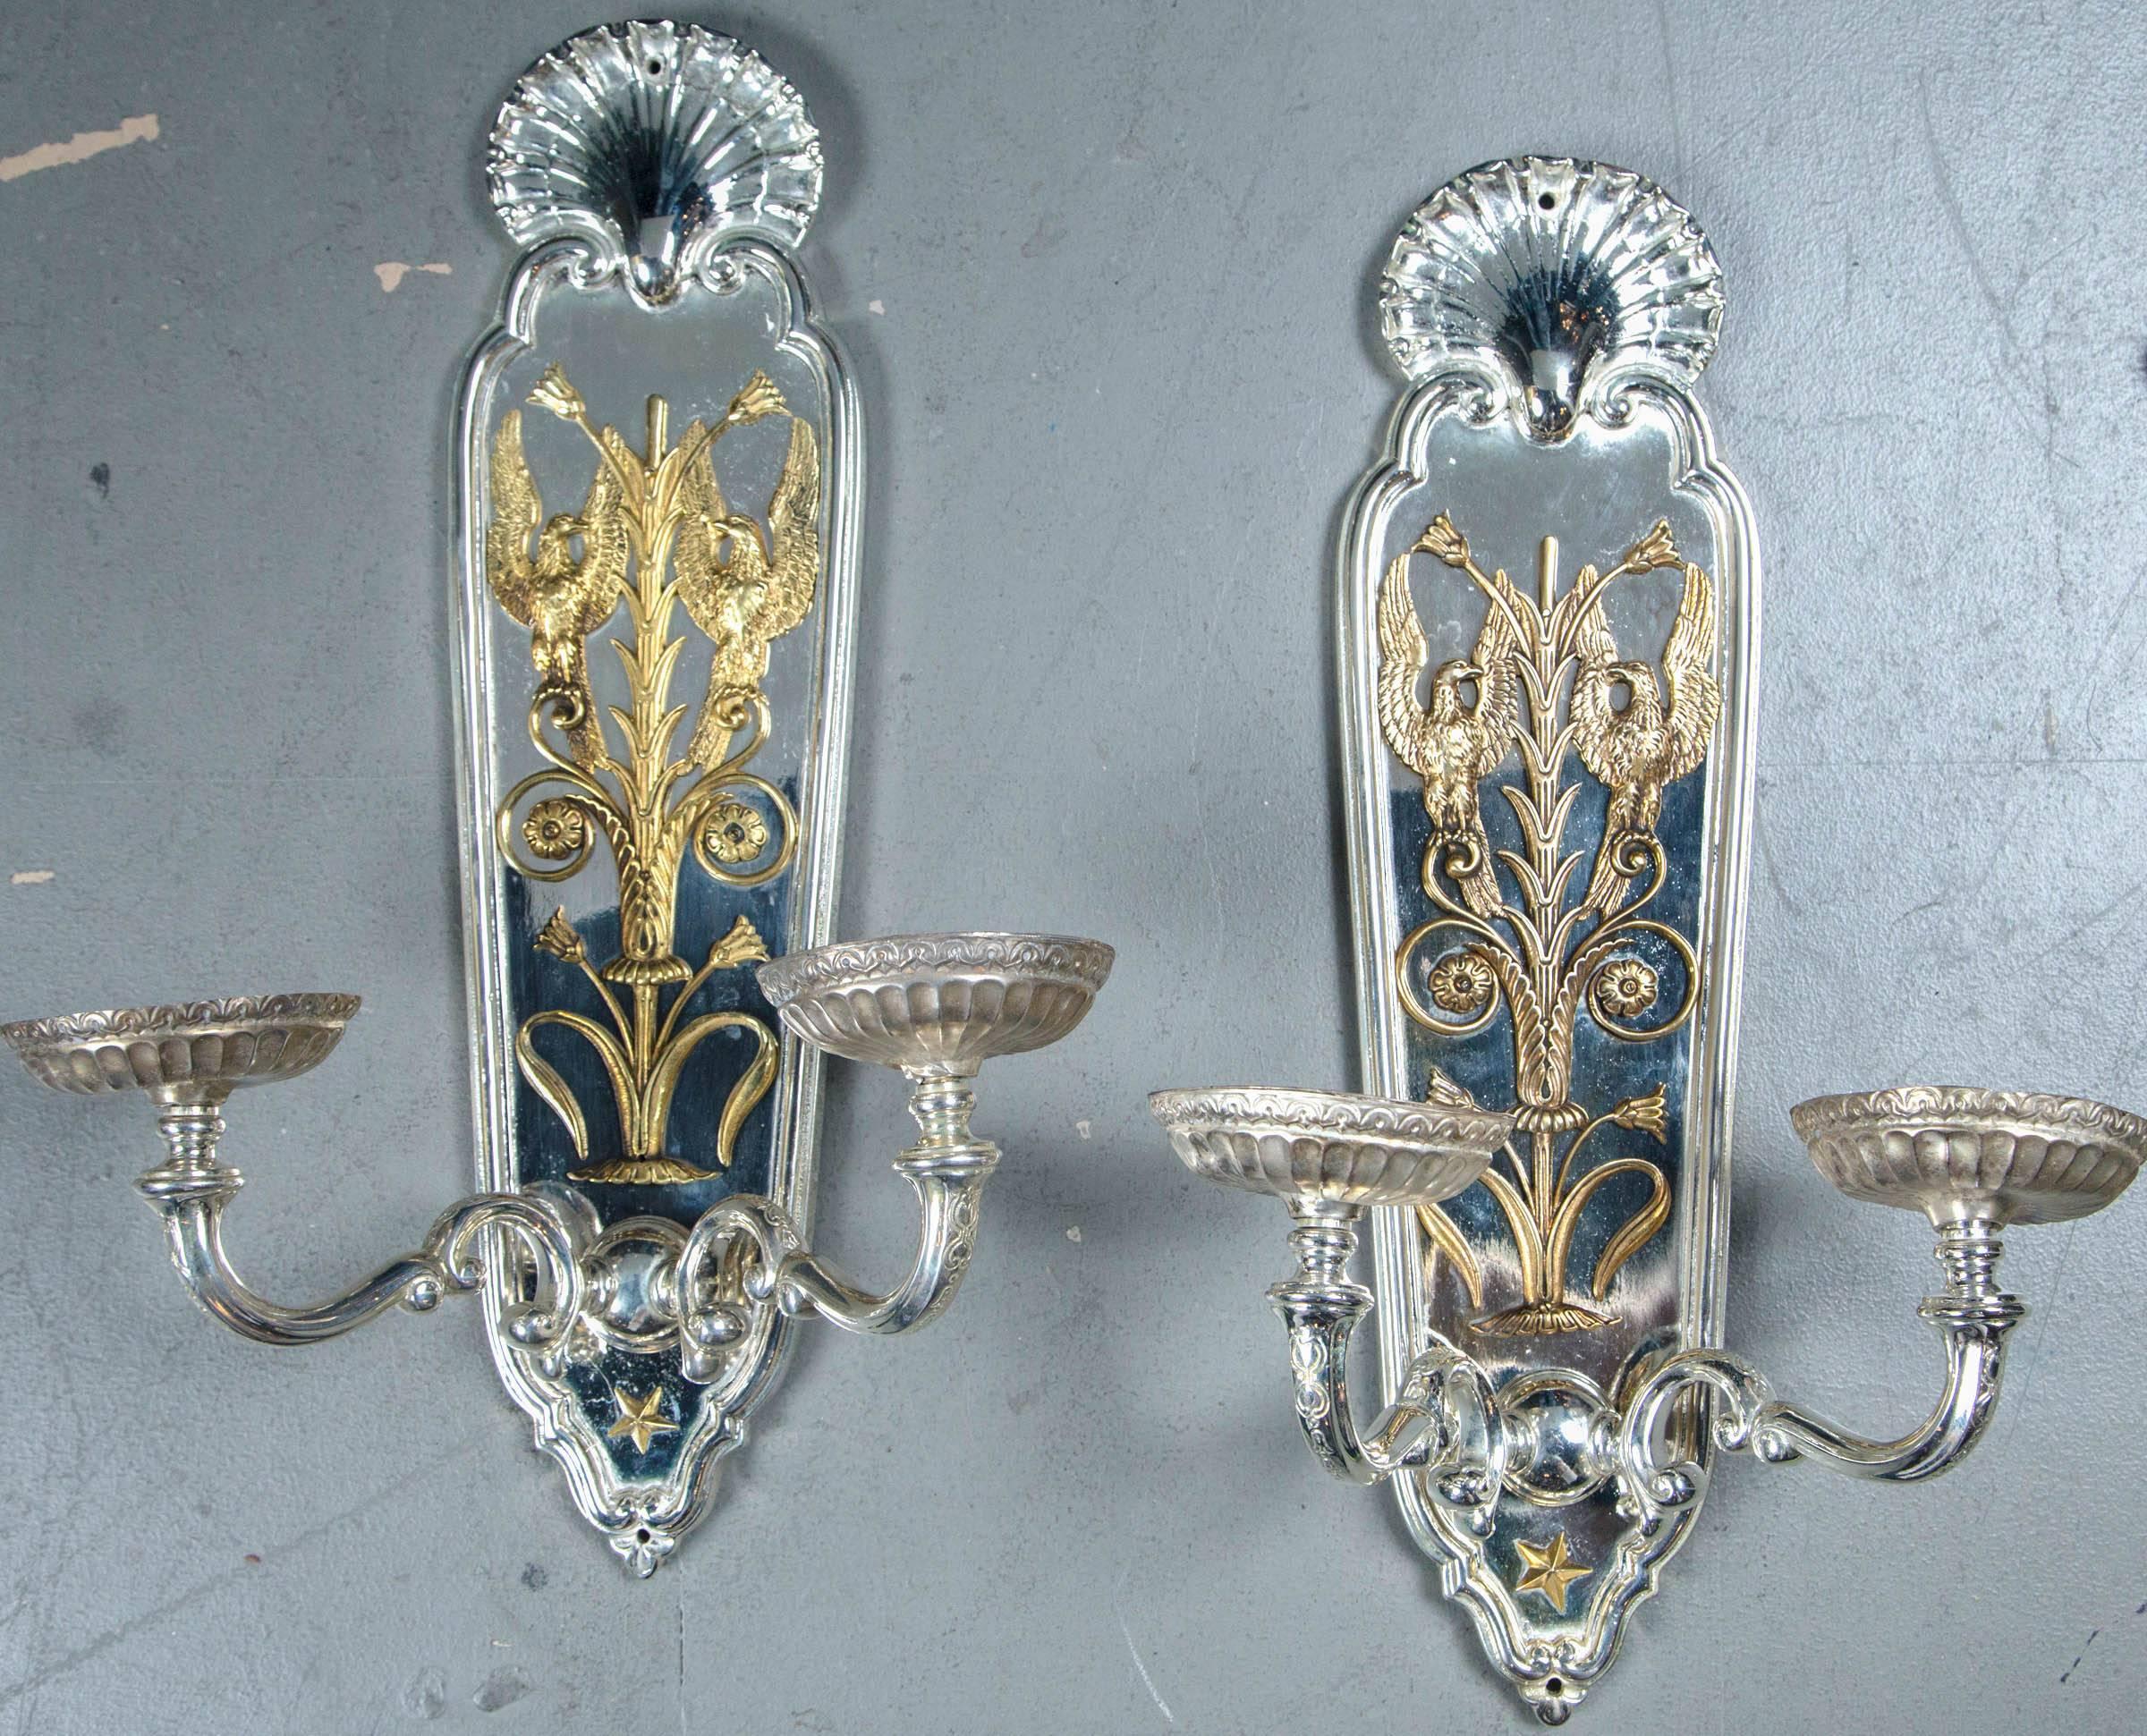 A pair of circa 1920 silver plated Caldwell sconces with gilt bronze design.